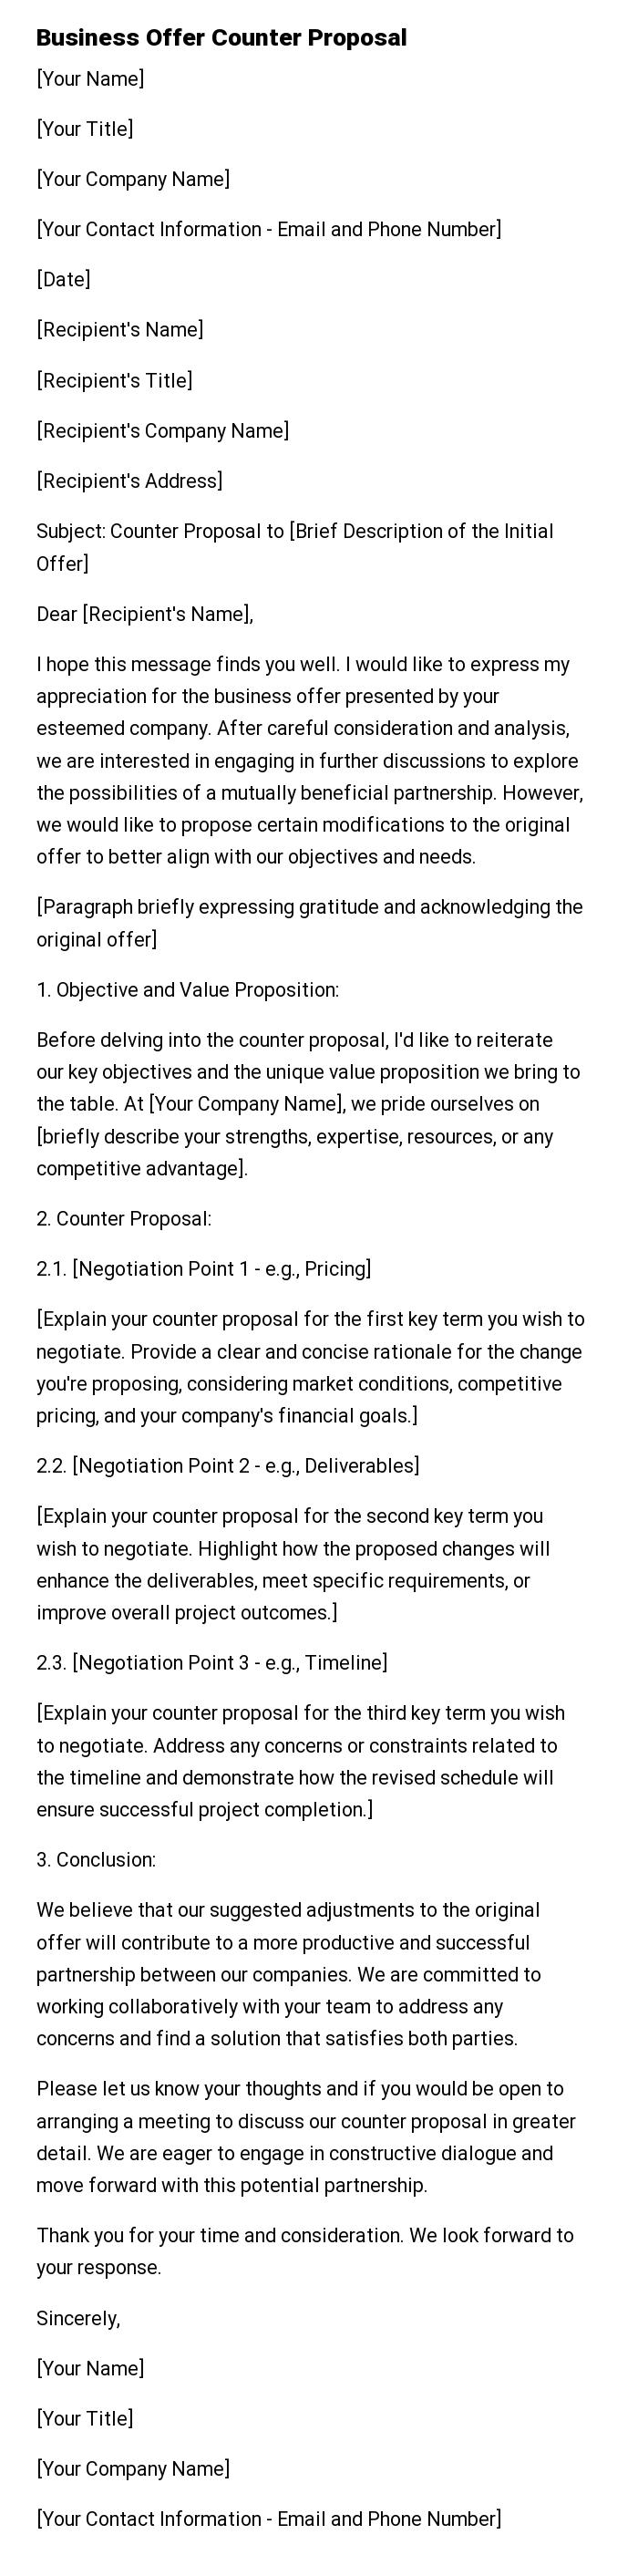 Business Offer Counter Proposal